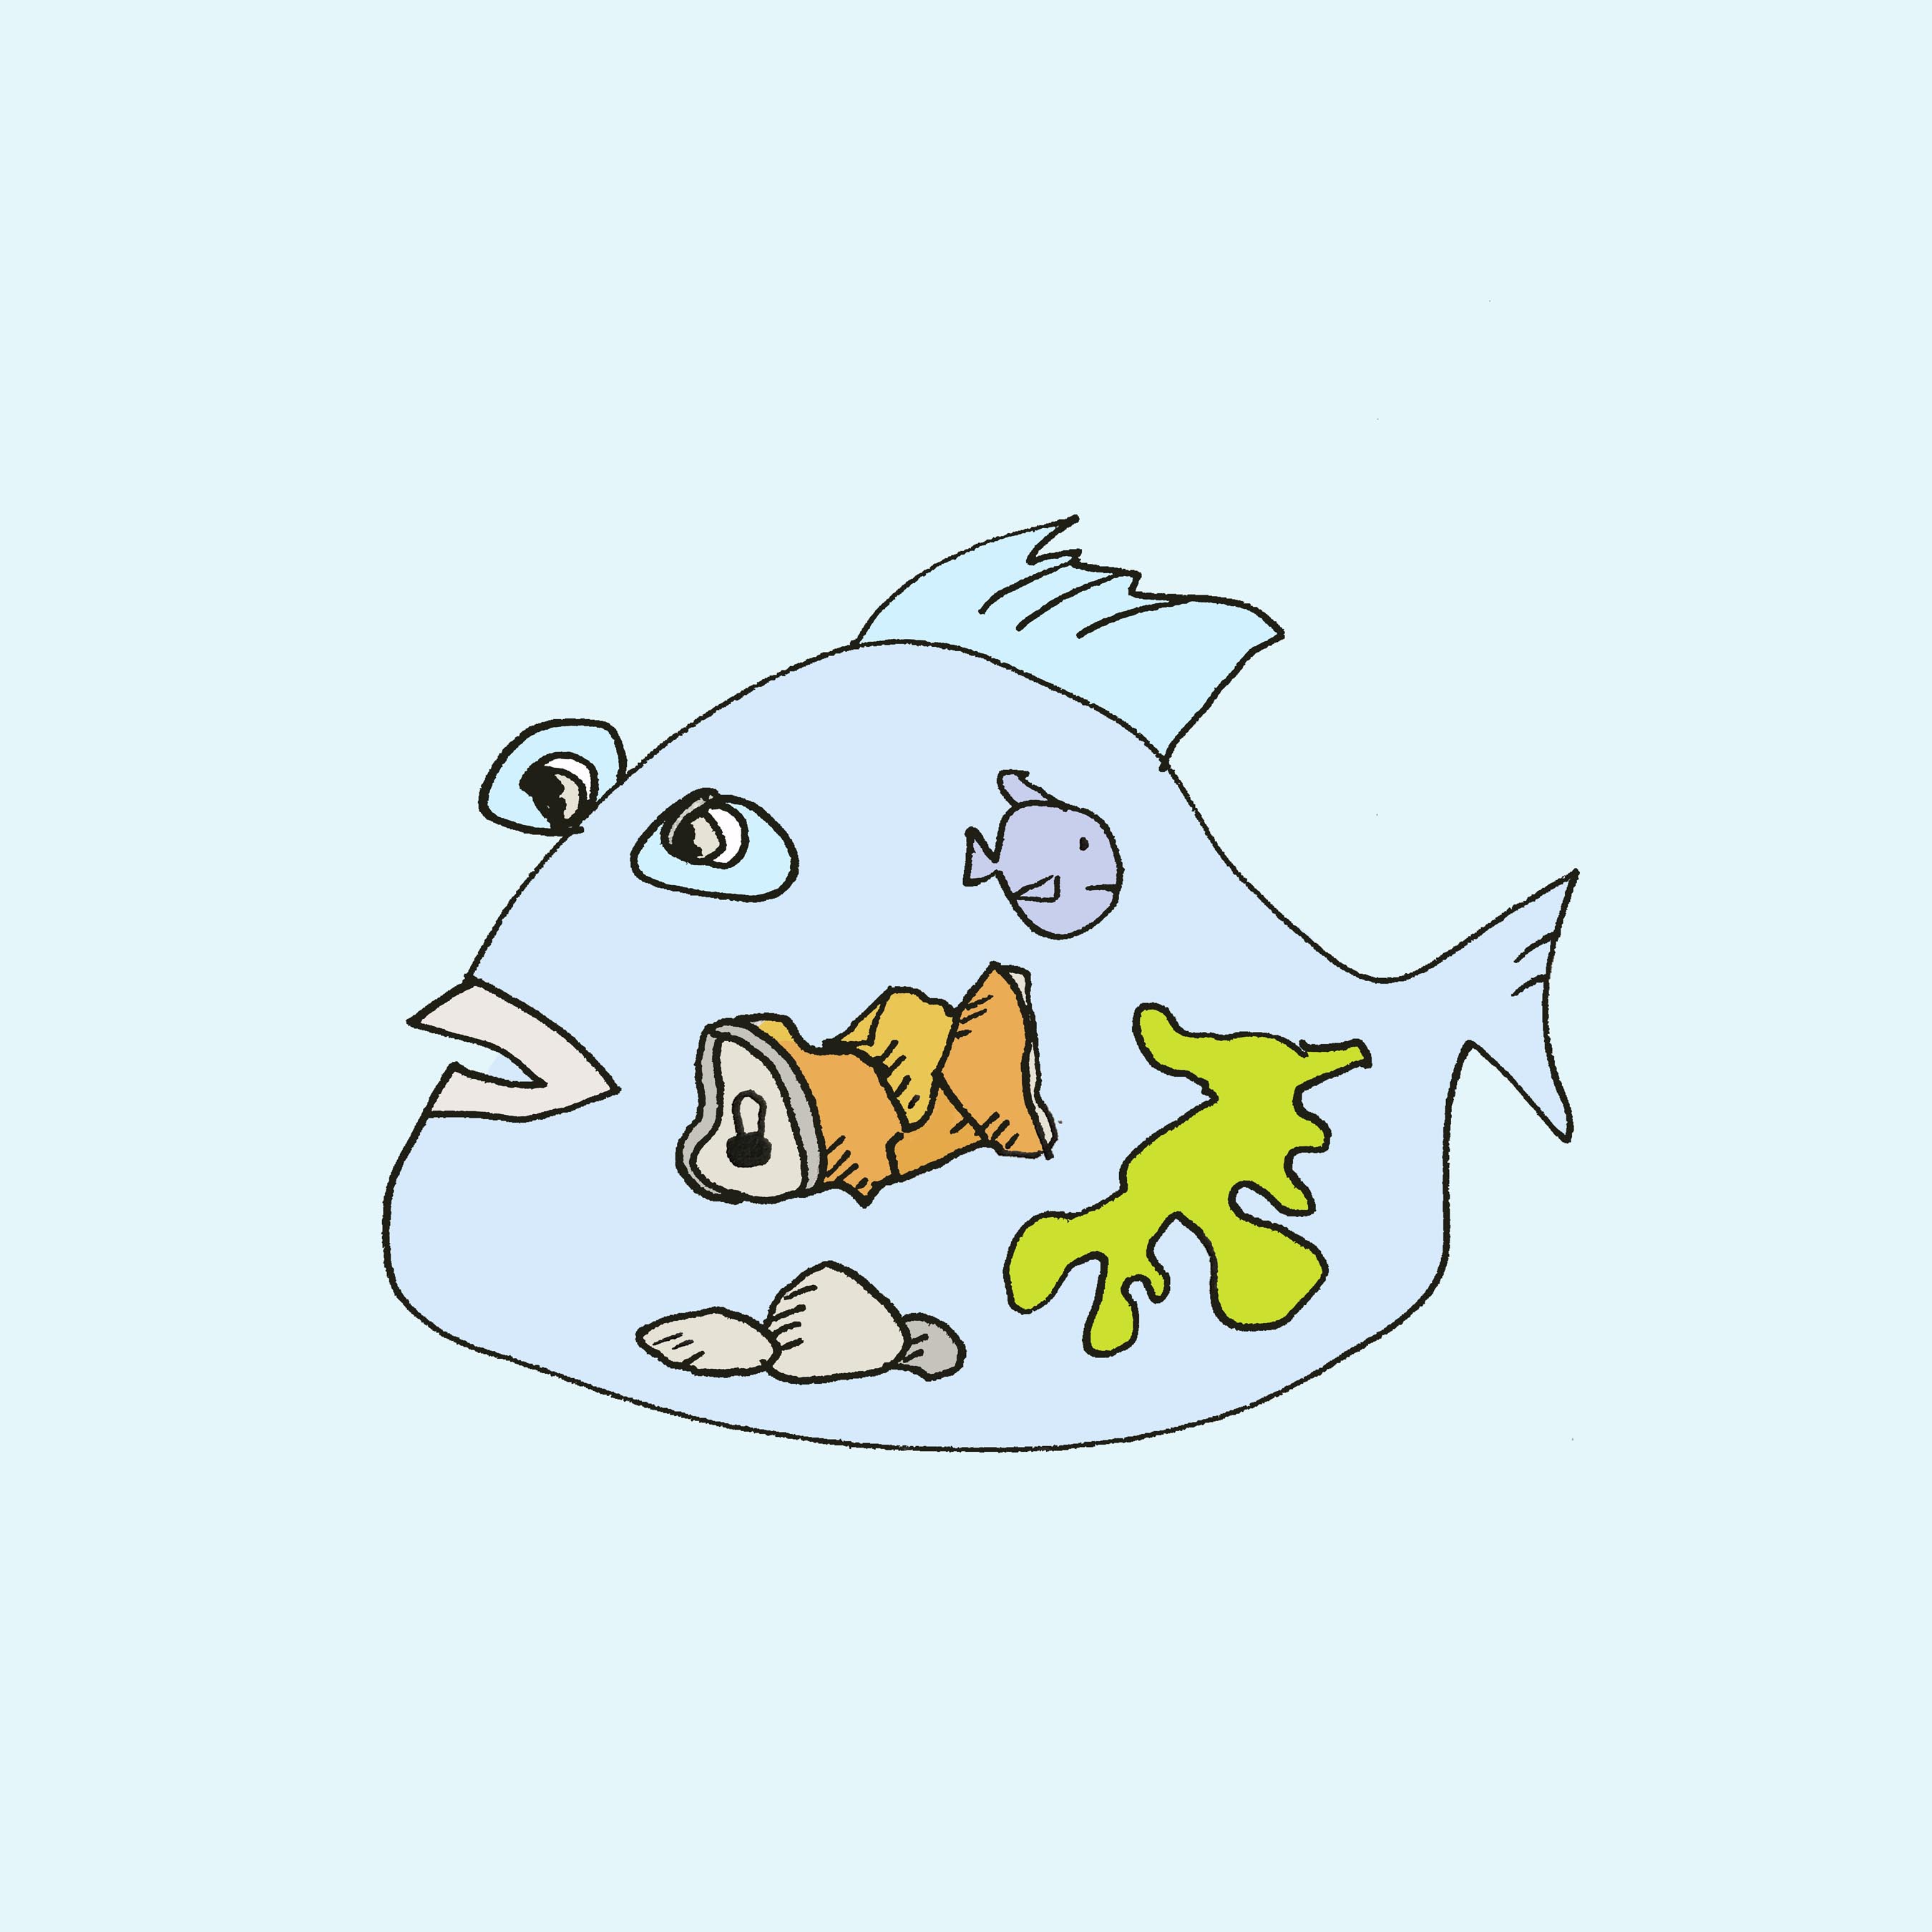 art every day number 468 / illustration  / fish food